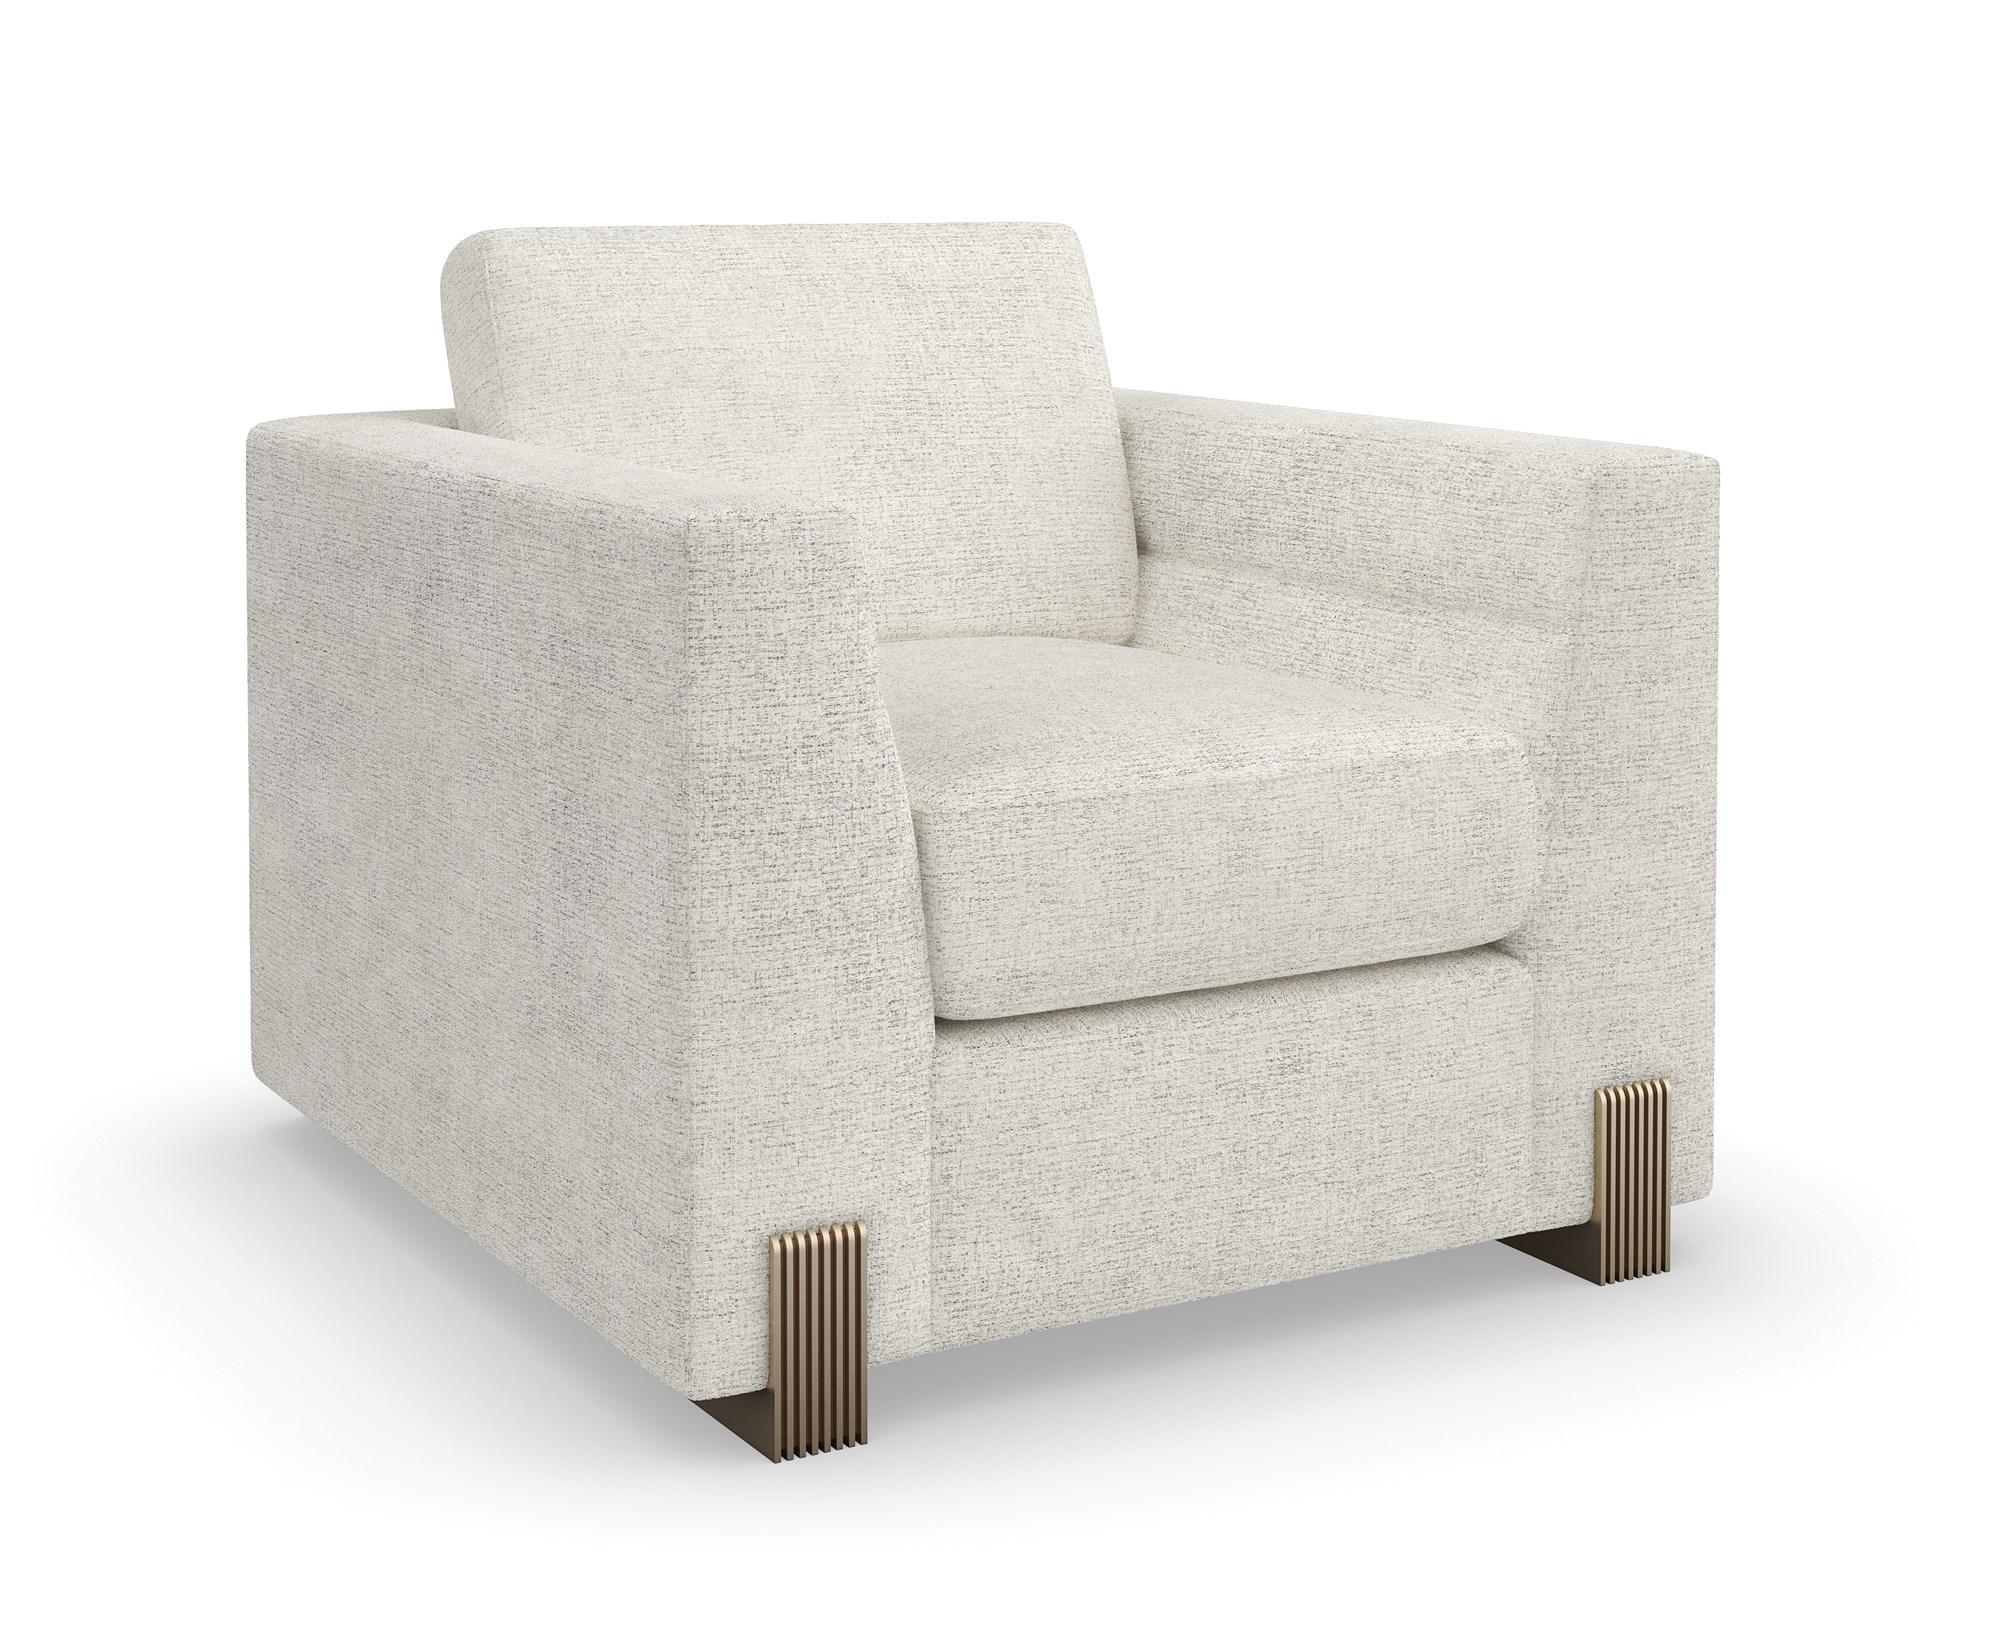 Contemporary Armchair COUNTER BALANCE CHAIR UPH-022-032-A in Oatmeal, Champagne Fabric